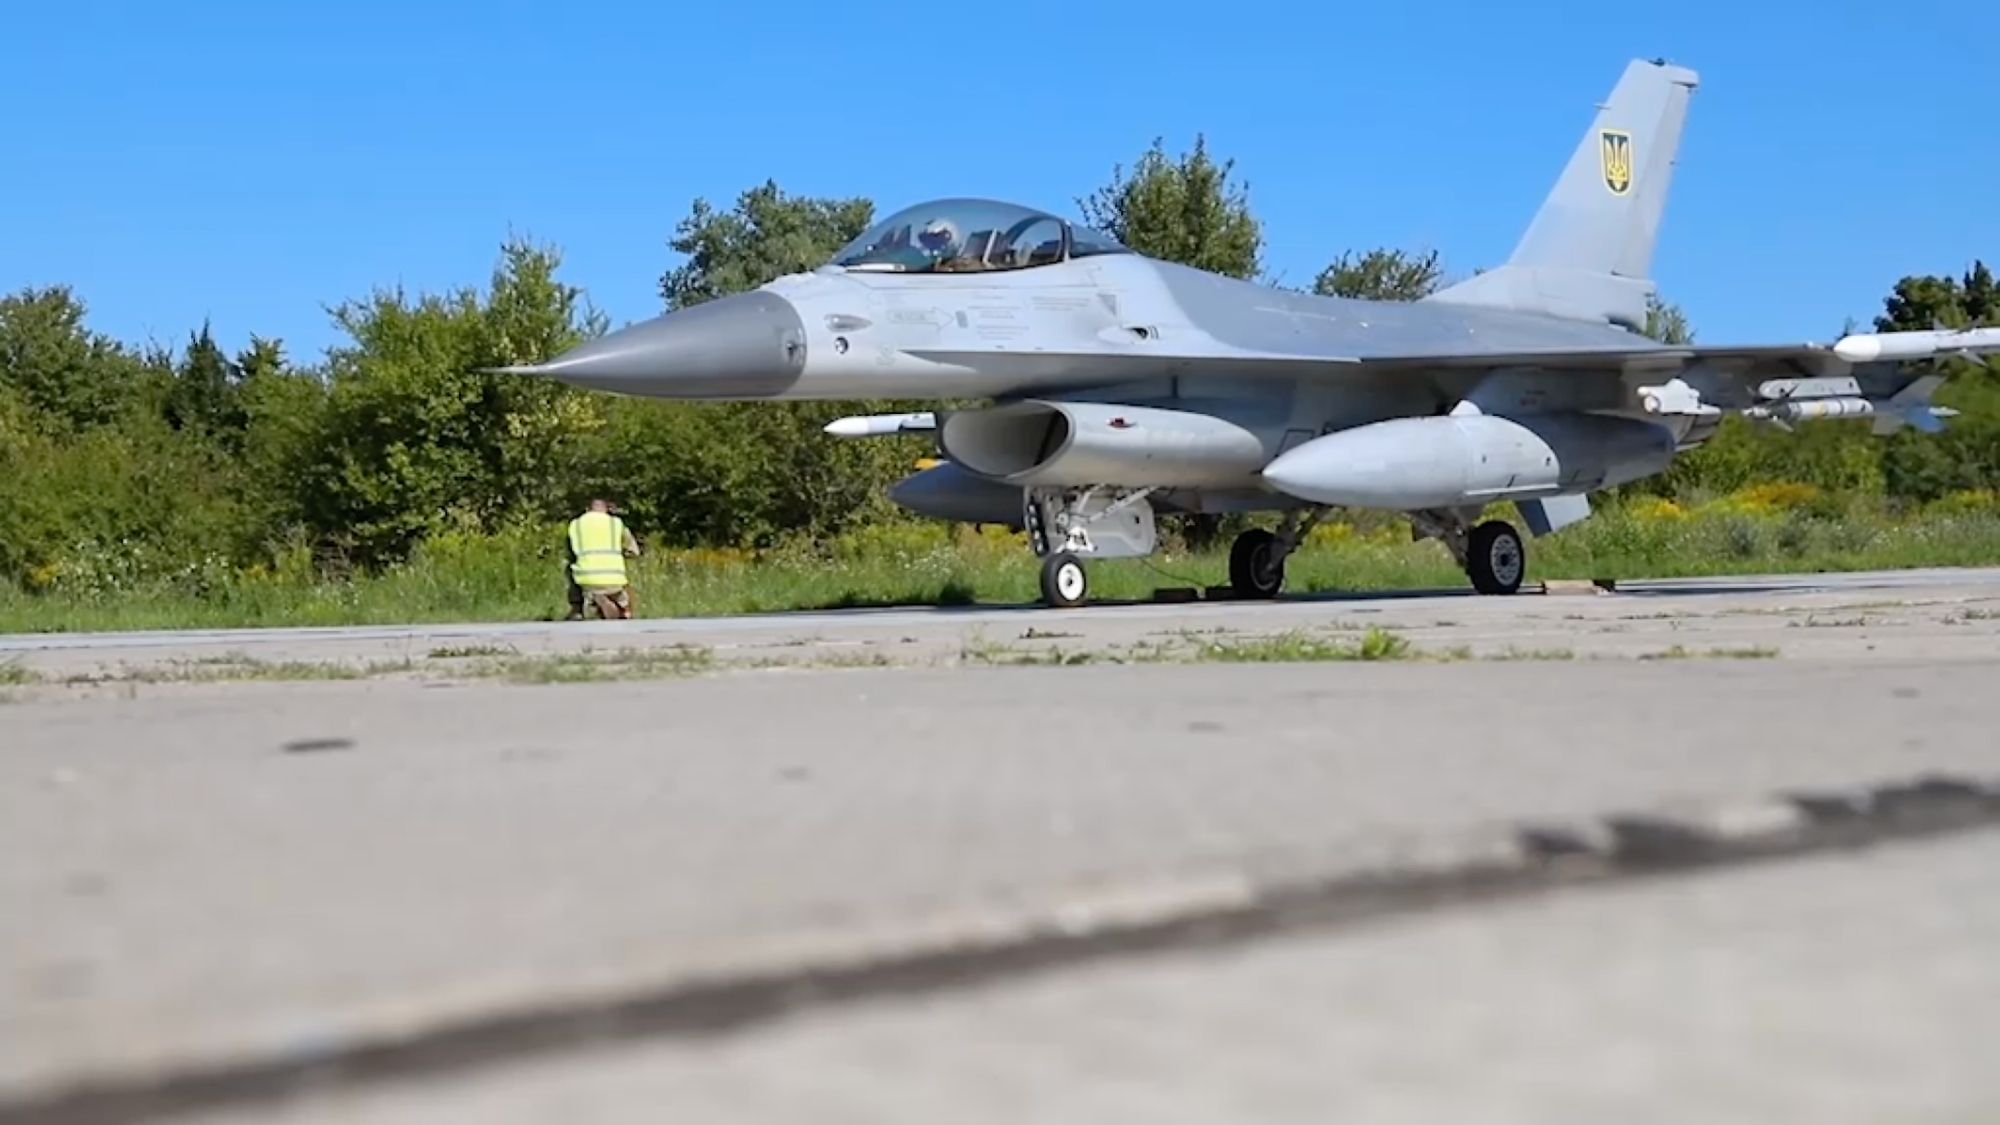 Volodymyr Zelensky confirmed that the Ukrainian Air Force has received F-16 Fighting Falcon fighters